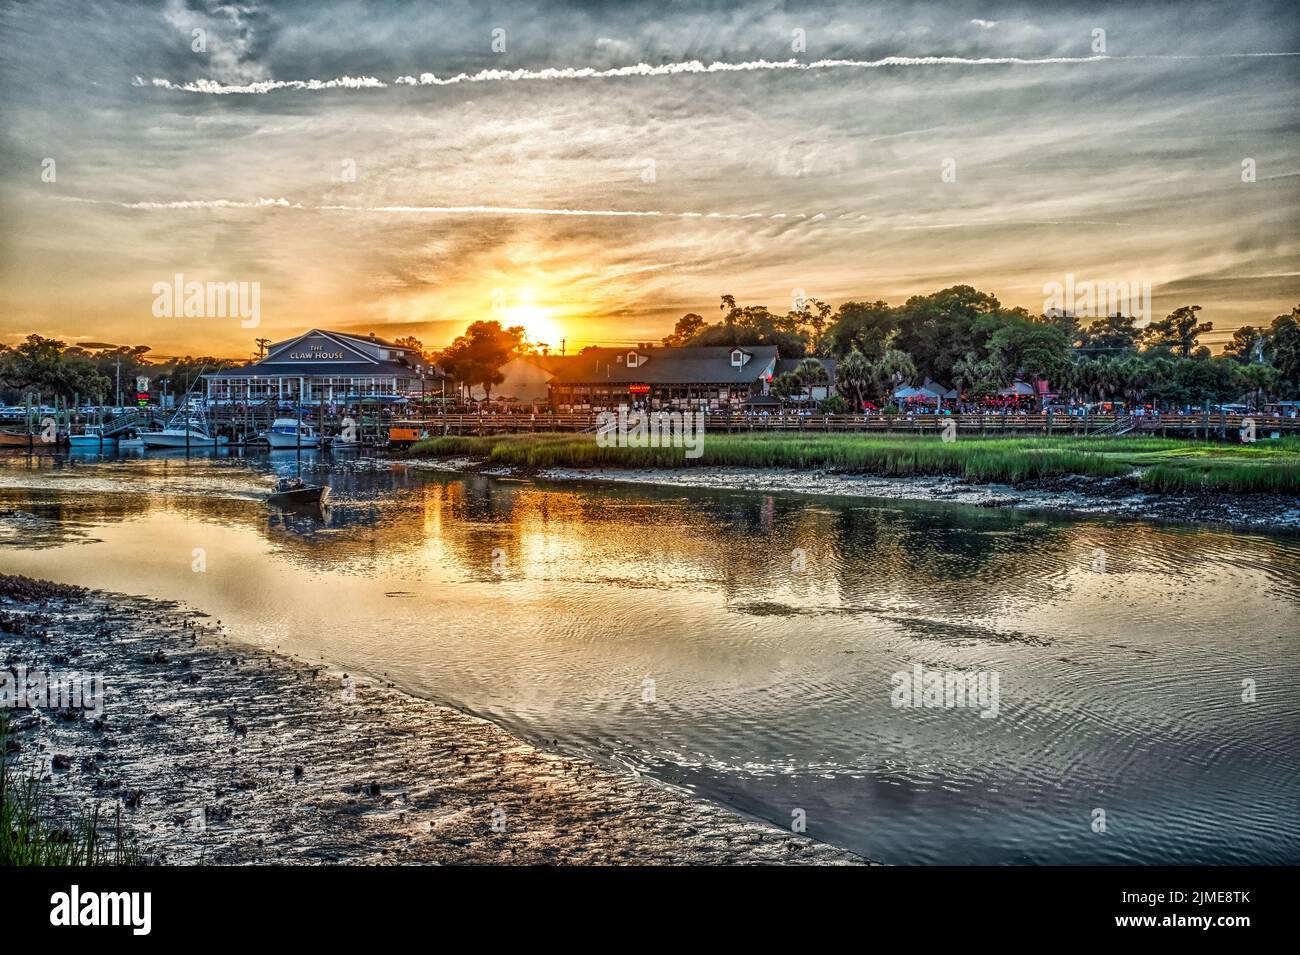 Views and scenes at murrells inlet south of myrtle beach south carolina Stock Photo